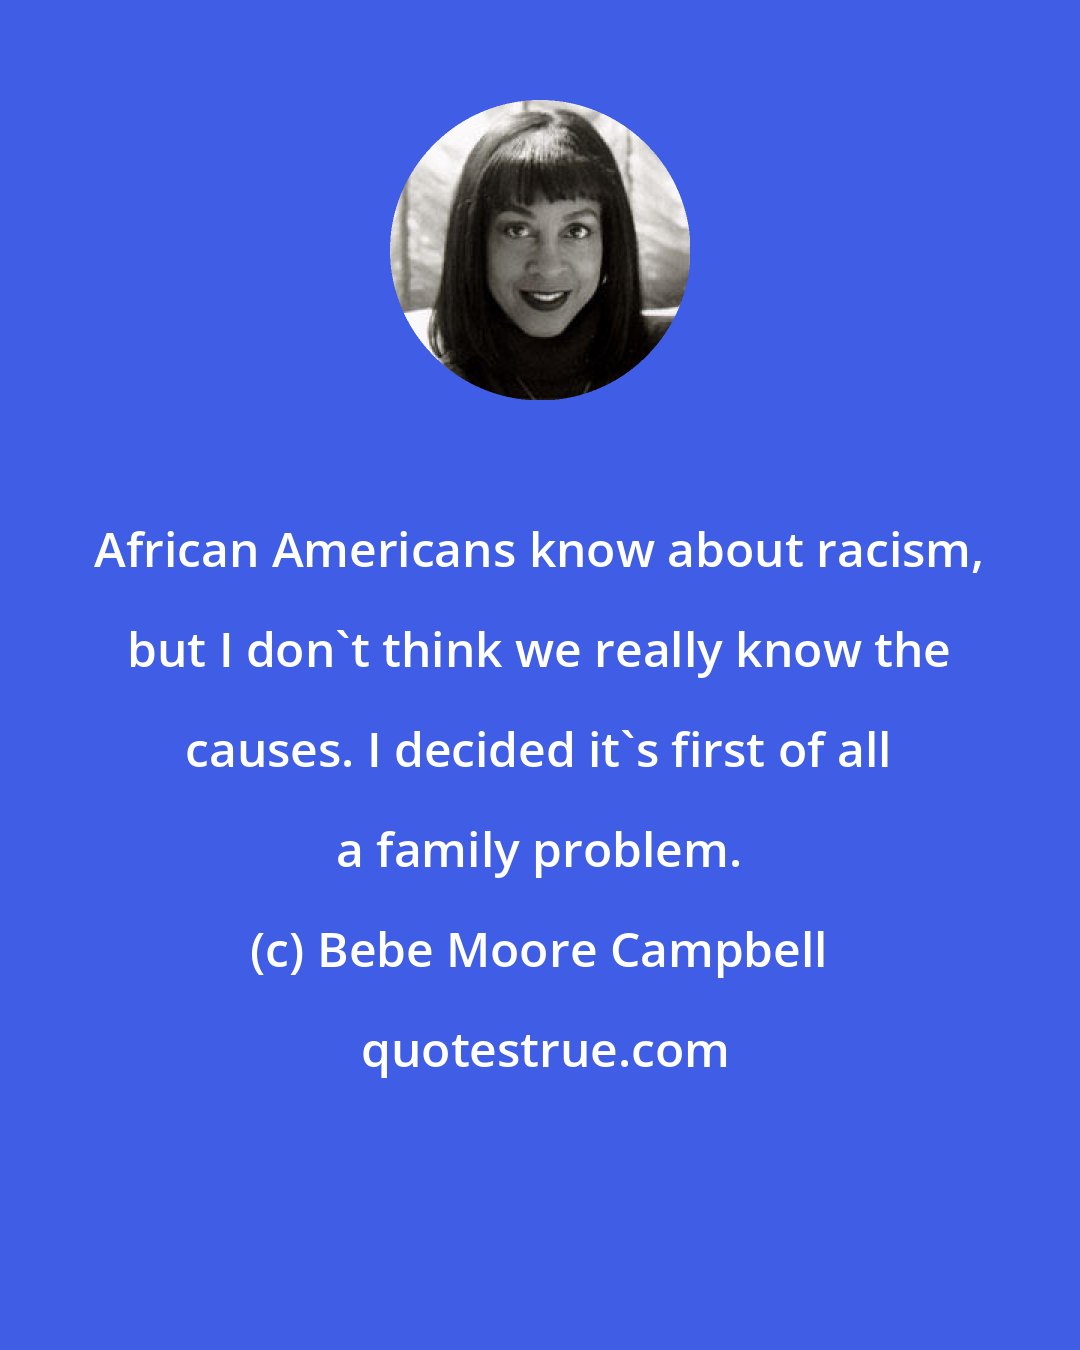 Bebe Moore Campbell: African Americans know about racism, but I don't think we really know the causes. I decided it's first of all a family problem.